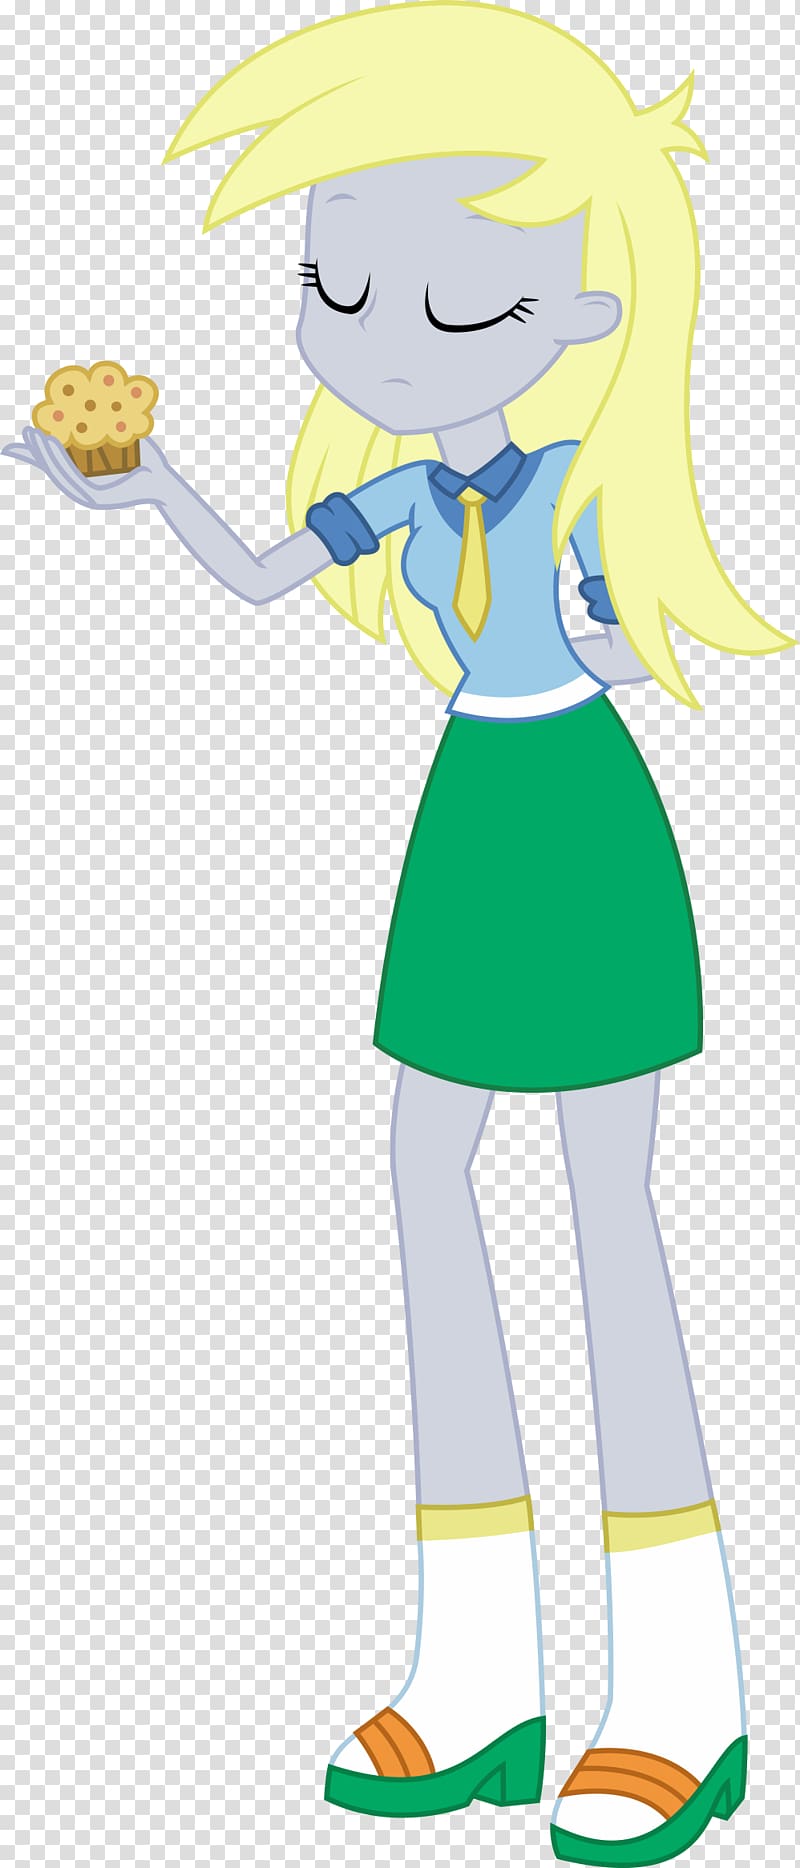 Derpy Hooves My Little Pony: Equestria Girls, Equestria Girls transparent background PNG clipart